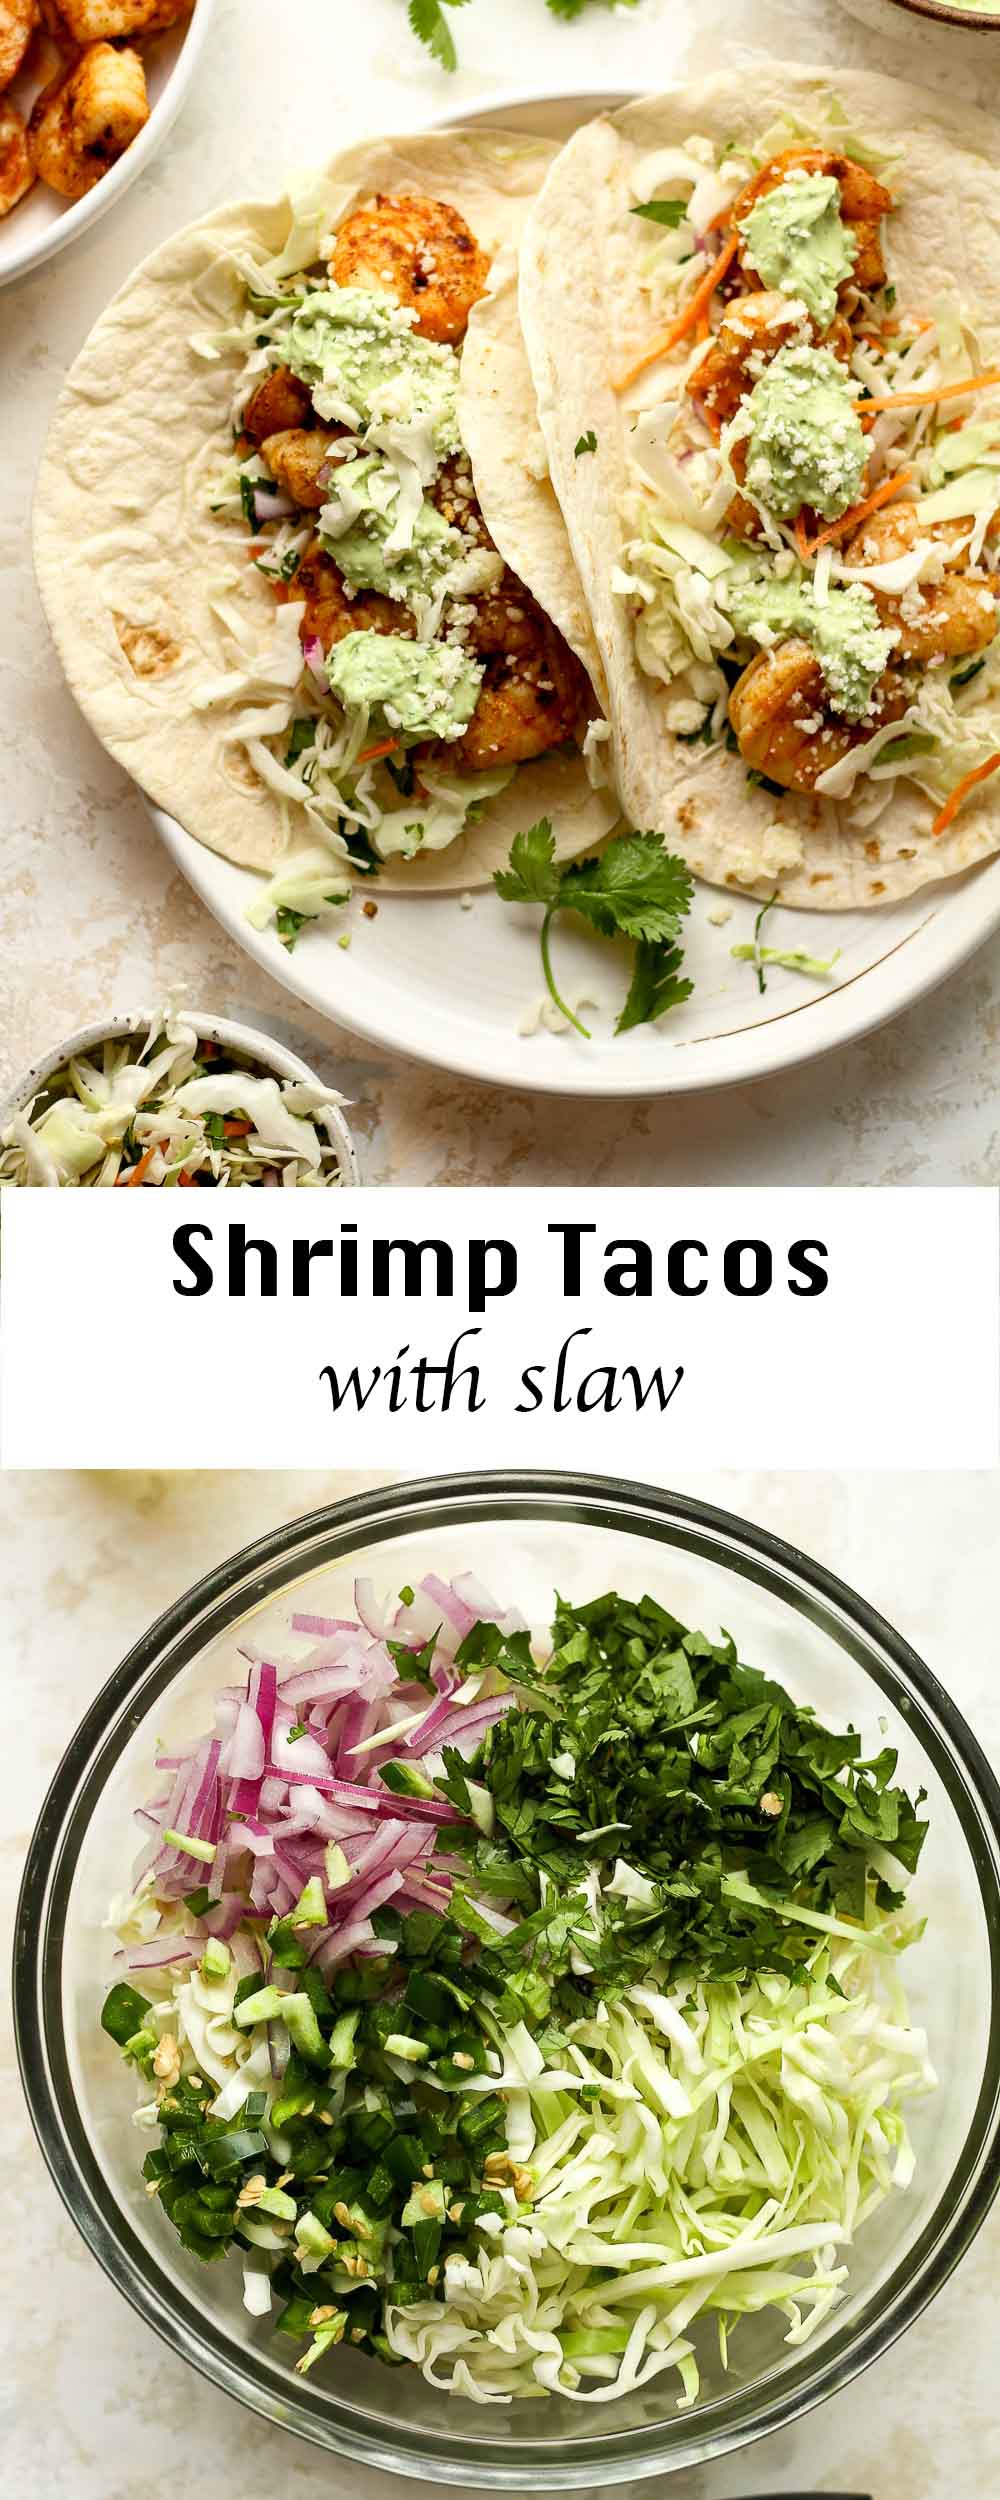 A collage of shrimp tacos with slaw - one of the tacos and one of the slaw.